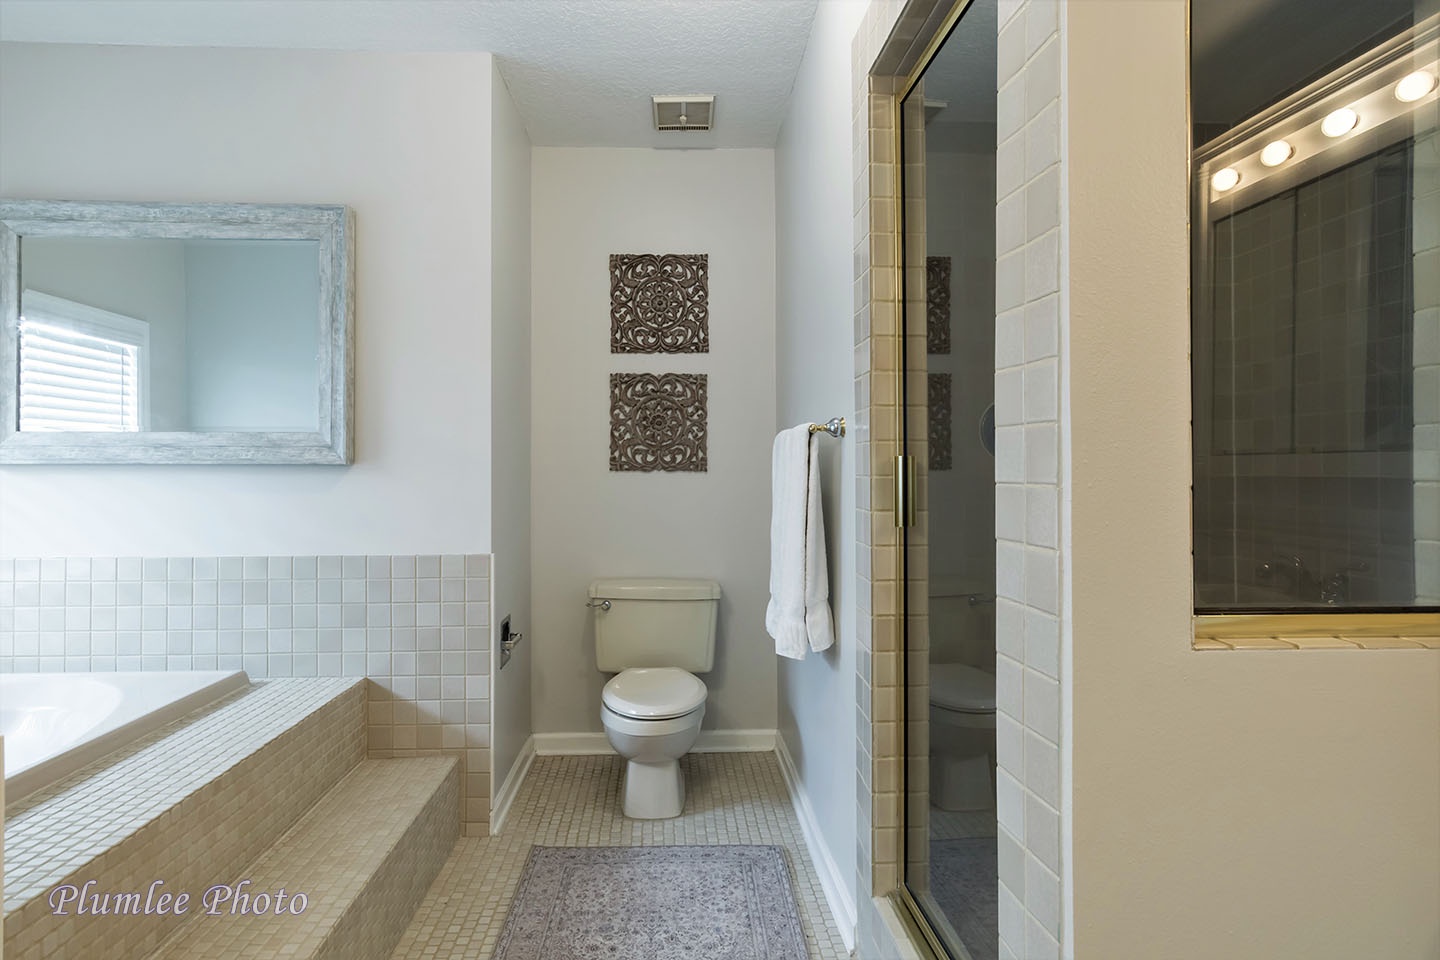 There's a large tub and walk-in shower in the family bath on the first floor.